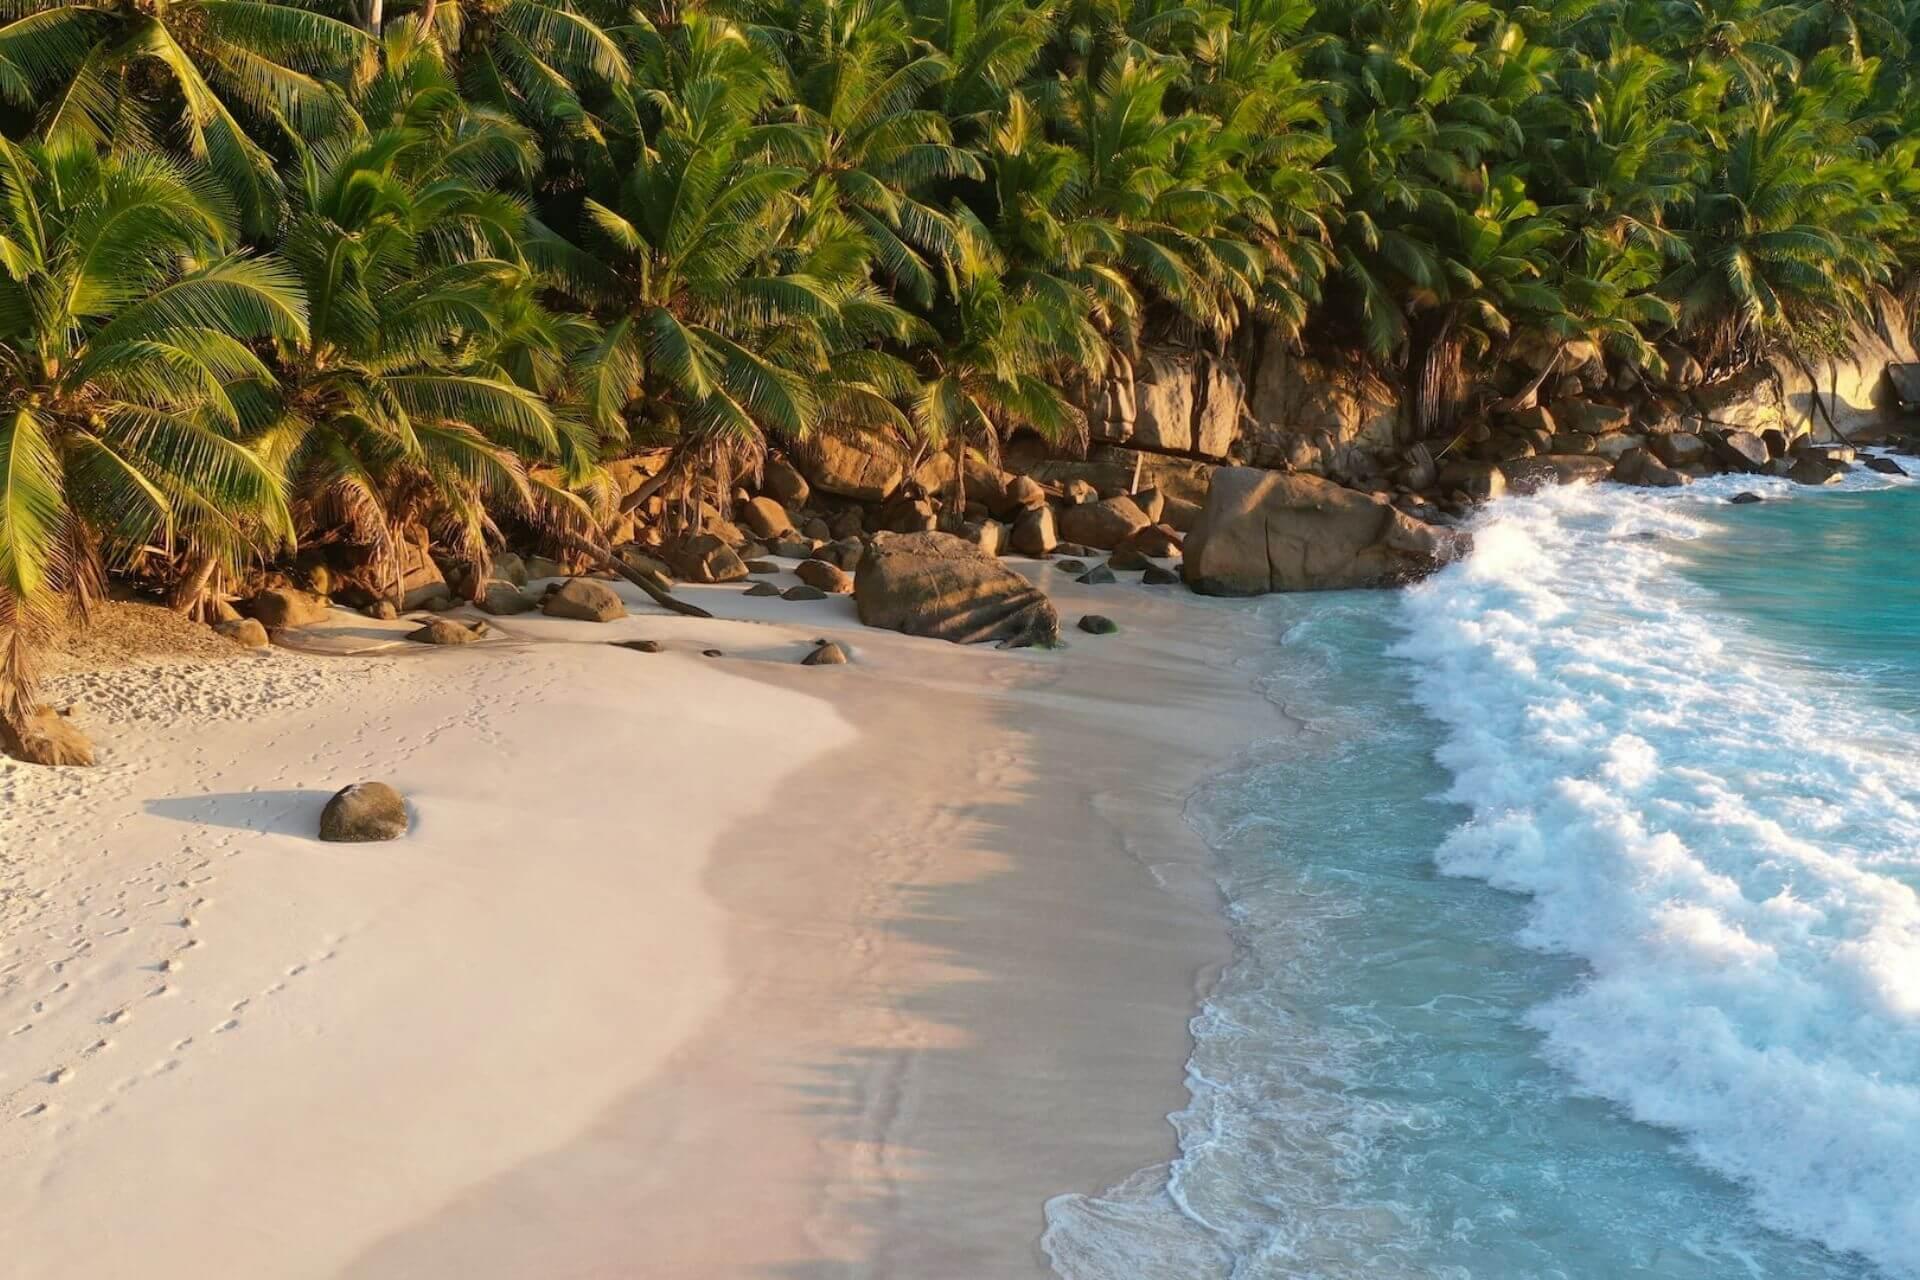 View of the beautiful beach, palm trees and waves in Seychelles